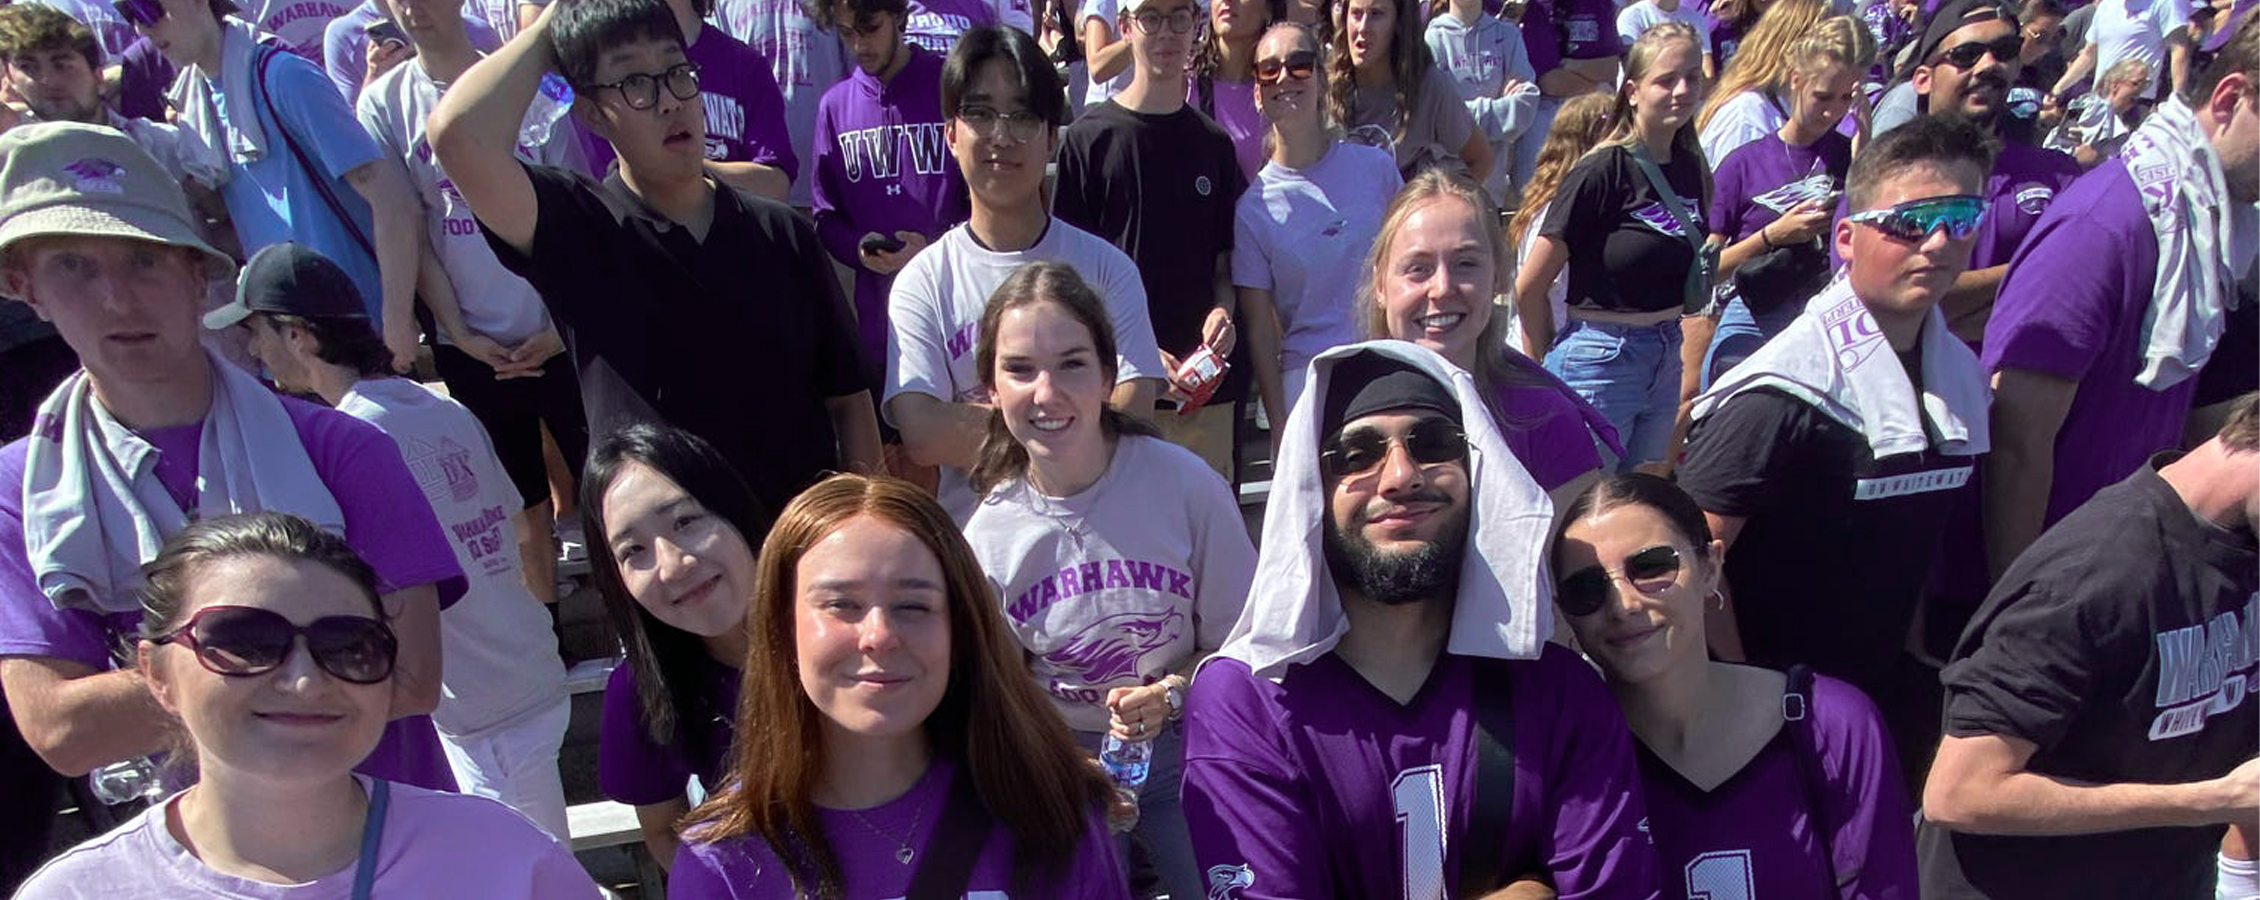 A group of international students pose for a photo while in the stands at Perkins Stadium watching a football game.